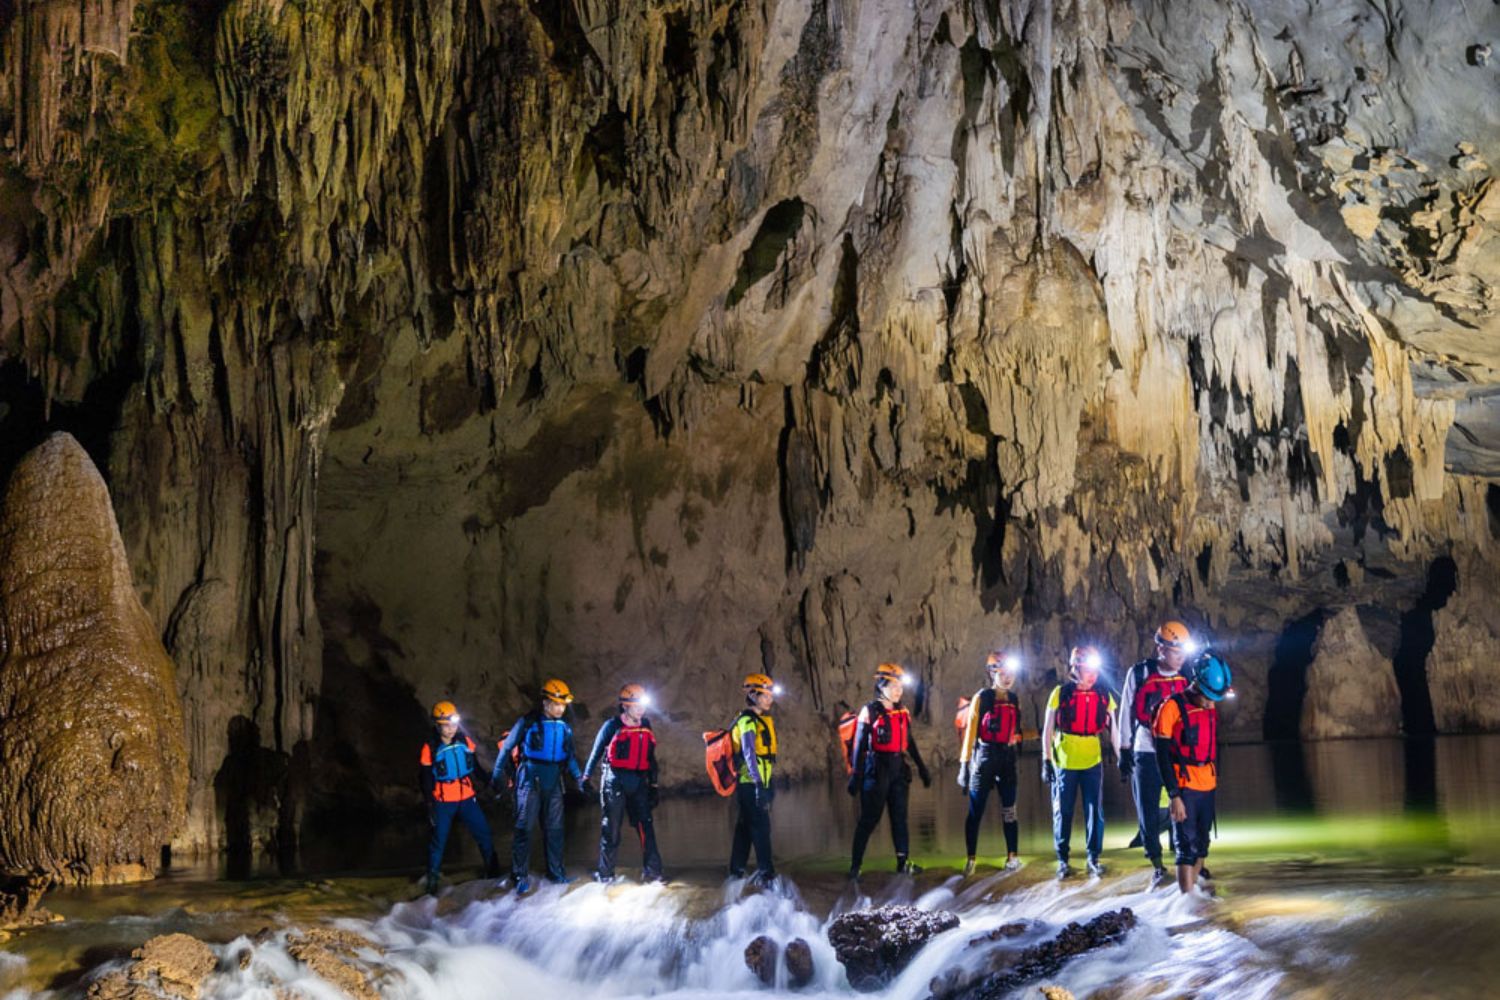 What Makes Quang Binh’s Caves So Special?